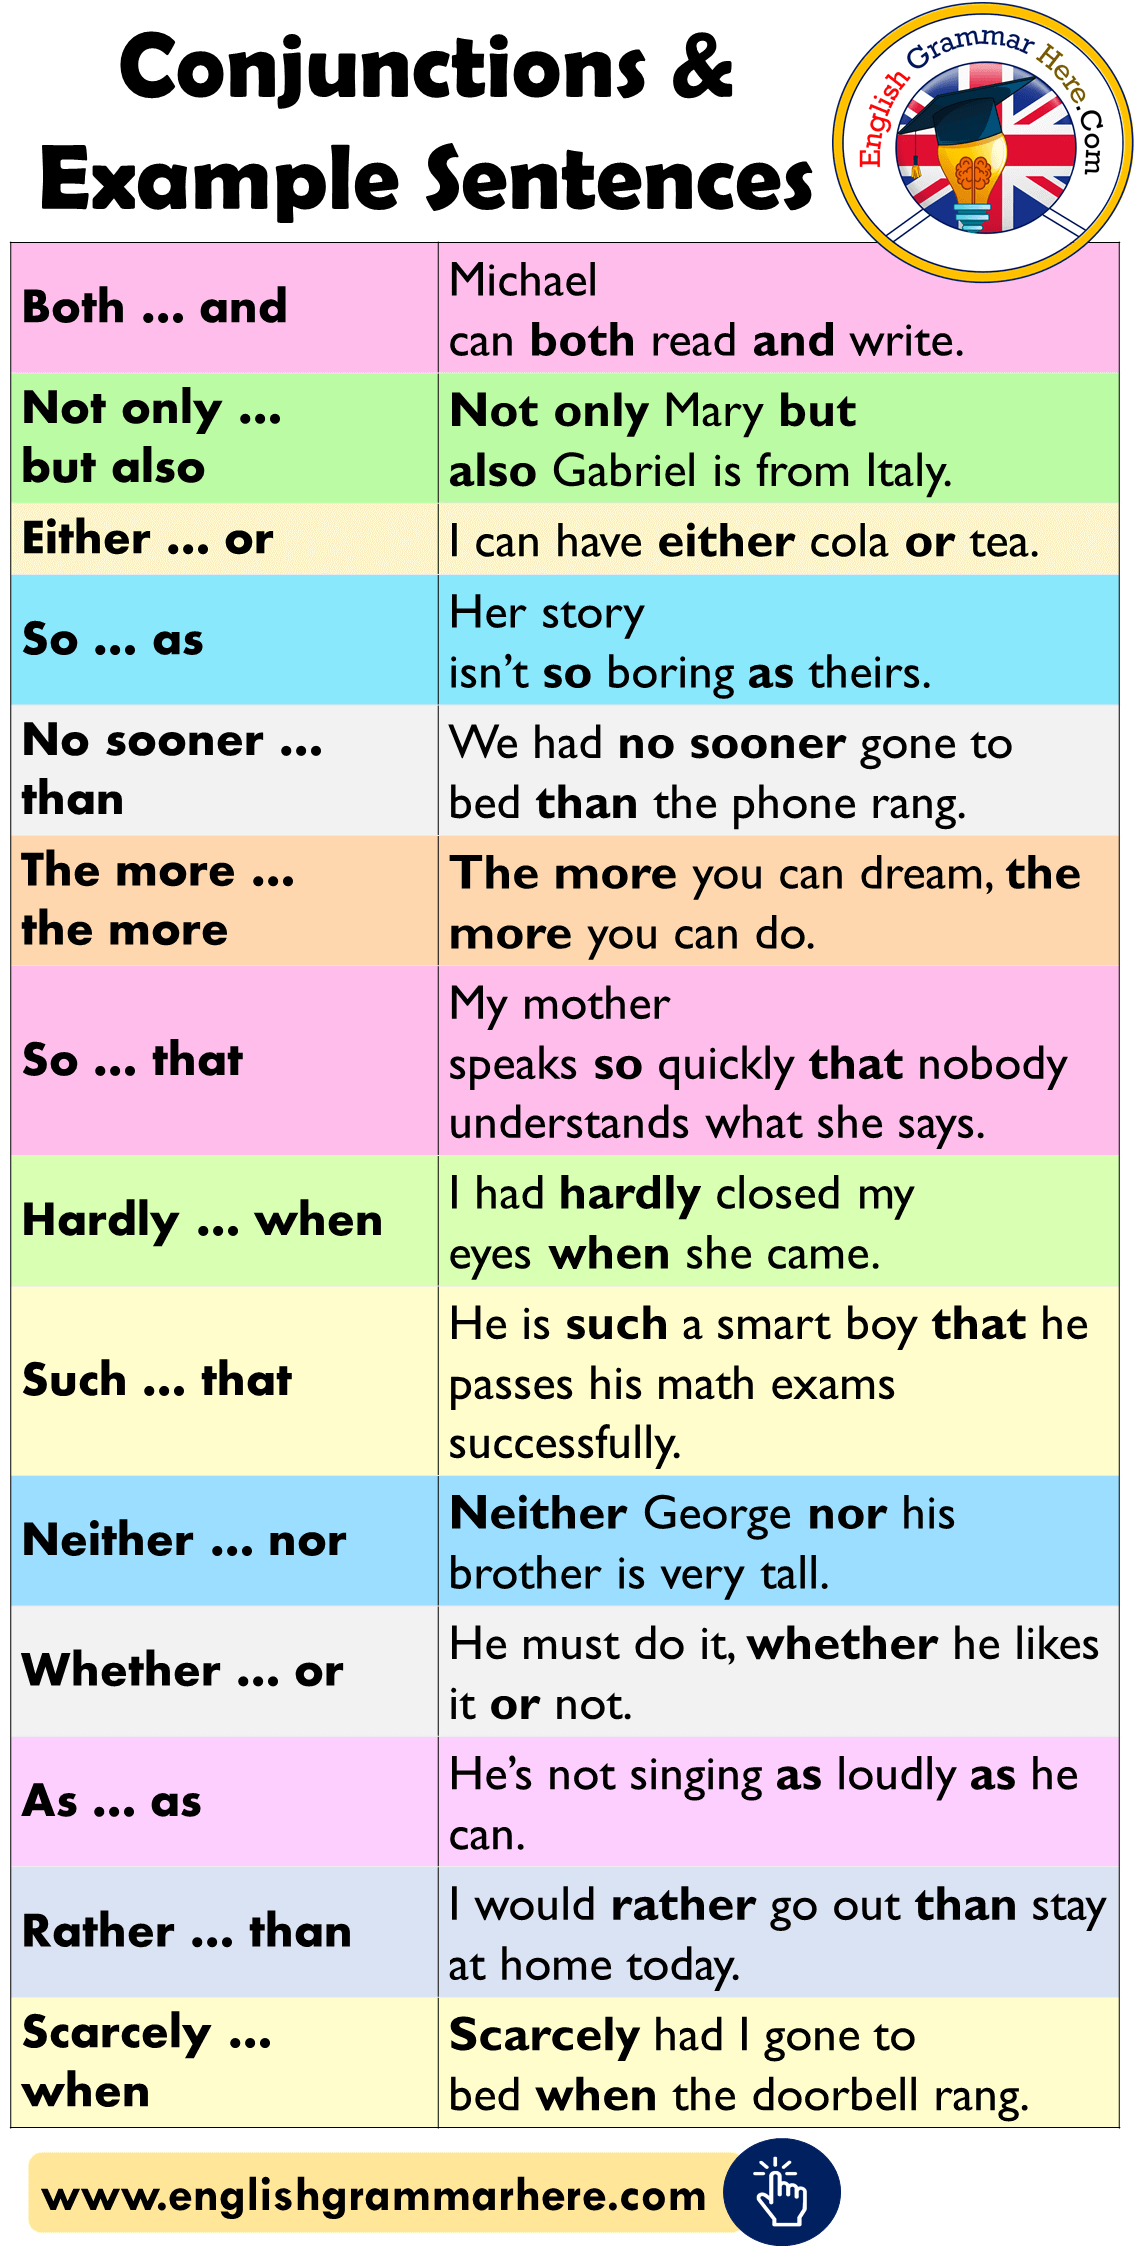 English Conjunctions List and Example Sentences